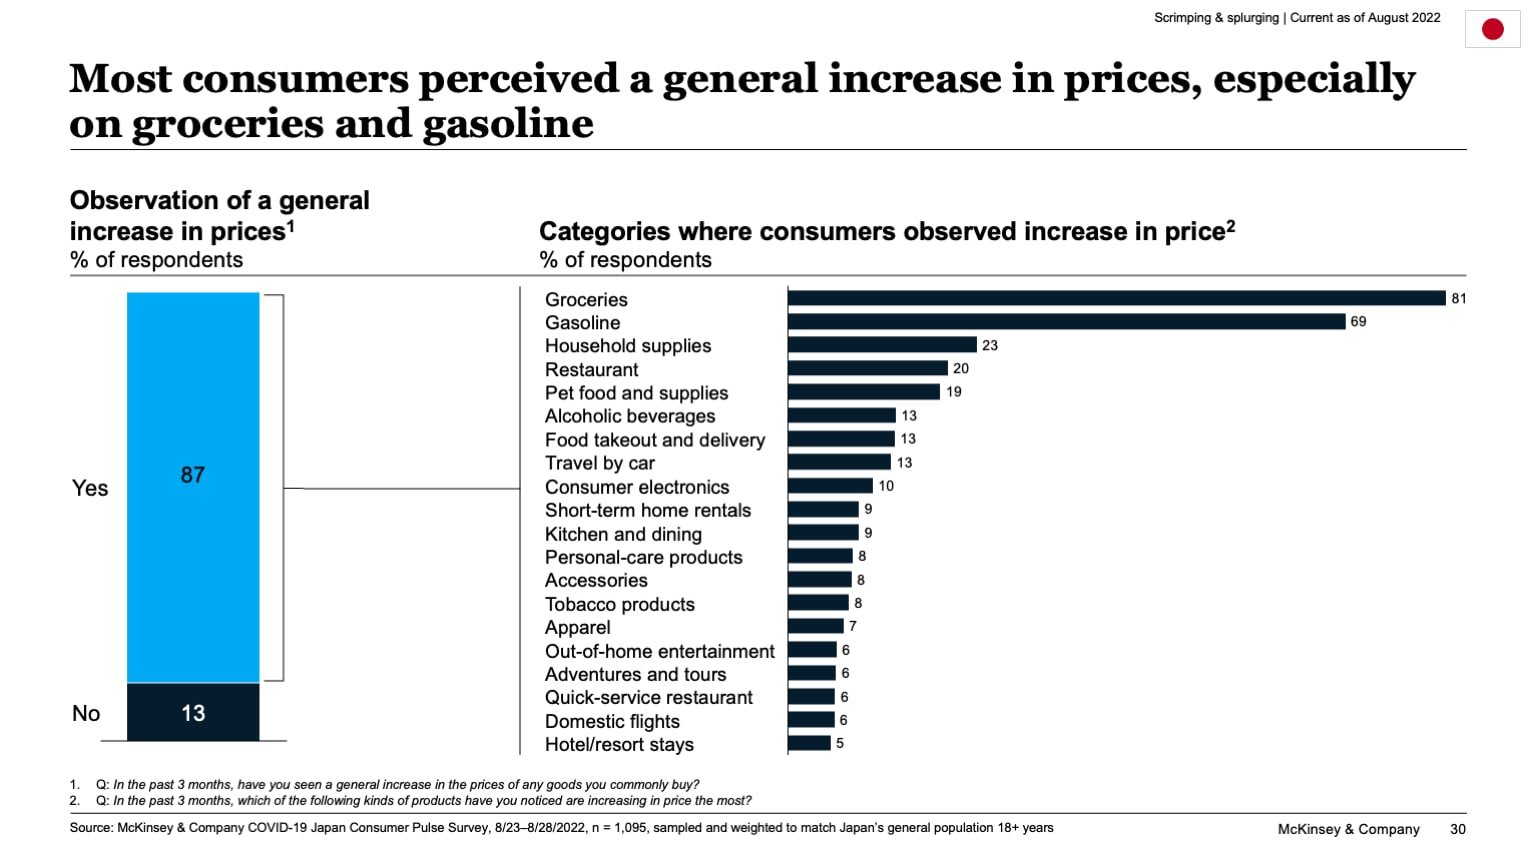 Most consumers perceived a general increase in prices, especially on groceries and gasoline